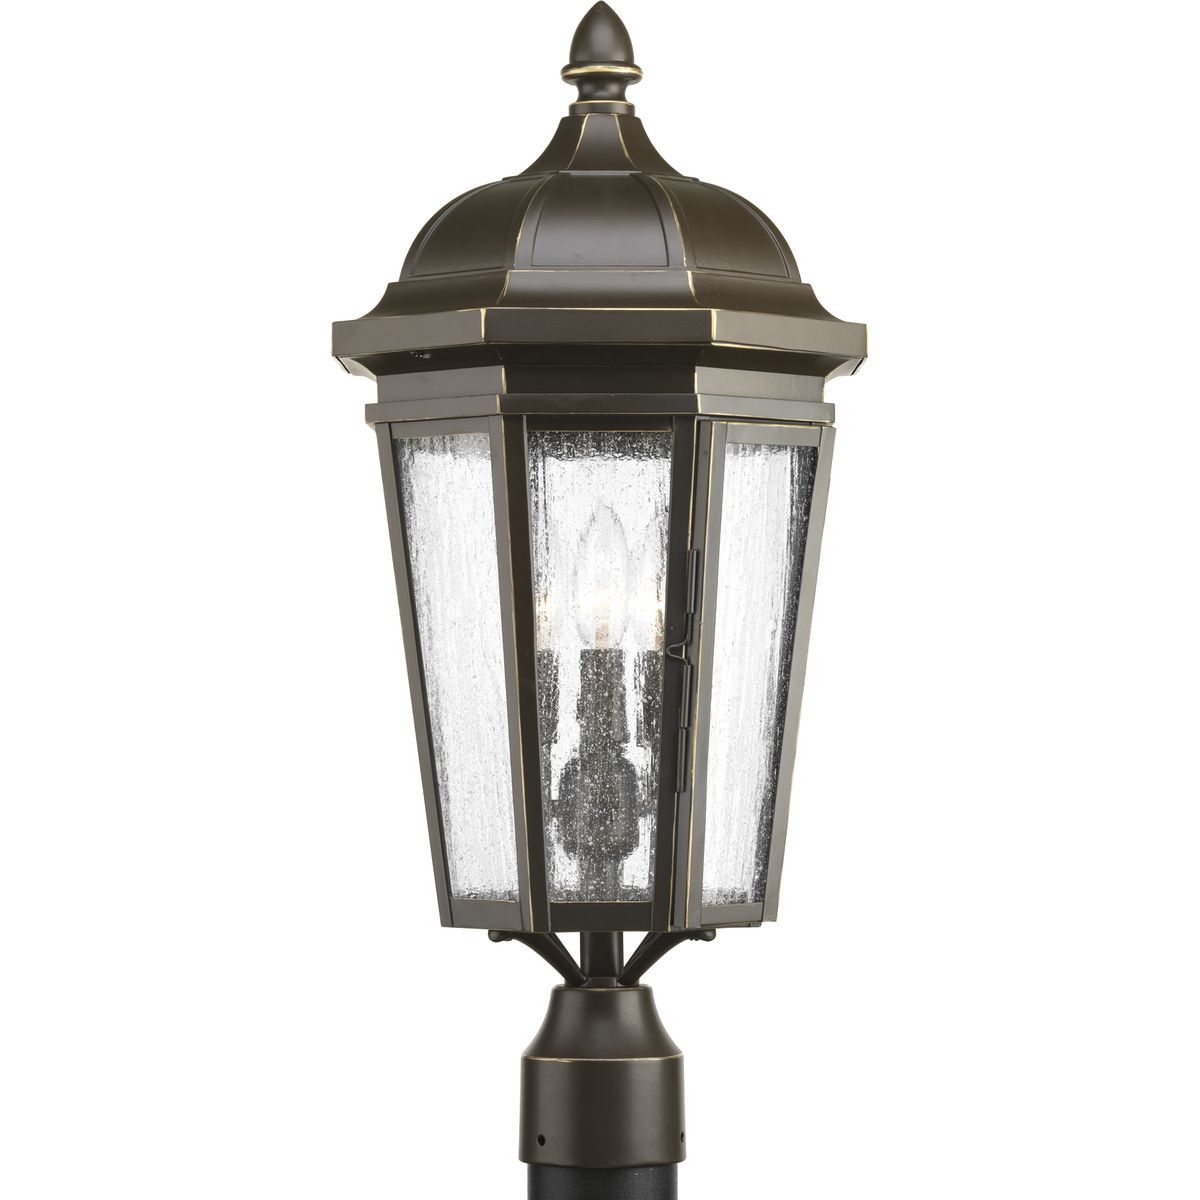 The three-light post lantern in the Verdae collection offers traditional styling for a variety of exteriors. Classic and formal clear seeded glass complements an Antique Bronze finish. Fits 3 in post (order separately). Hinged door for easy access to replace lamps.